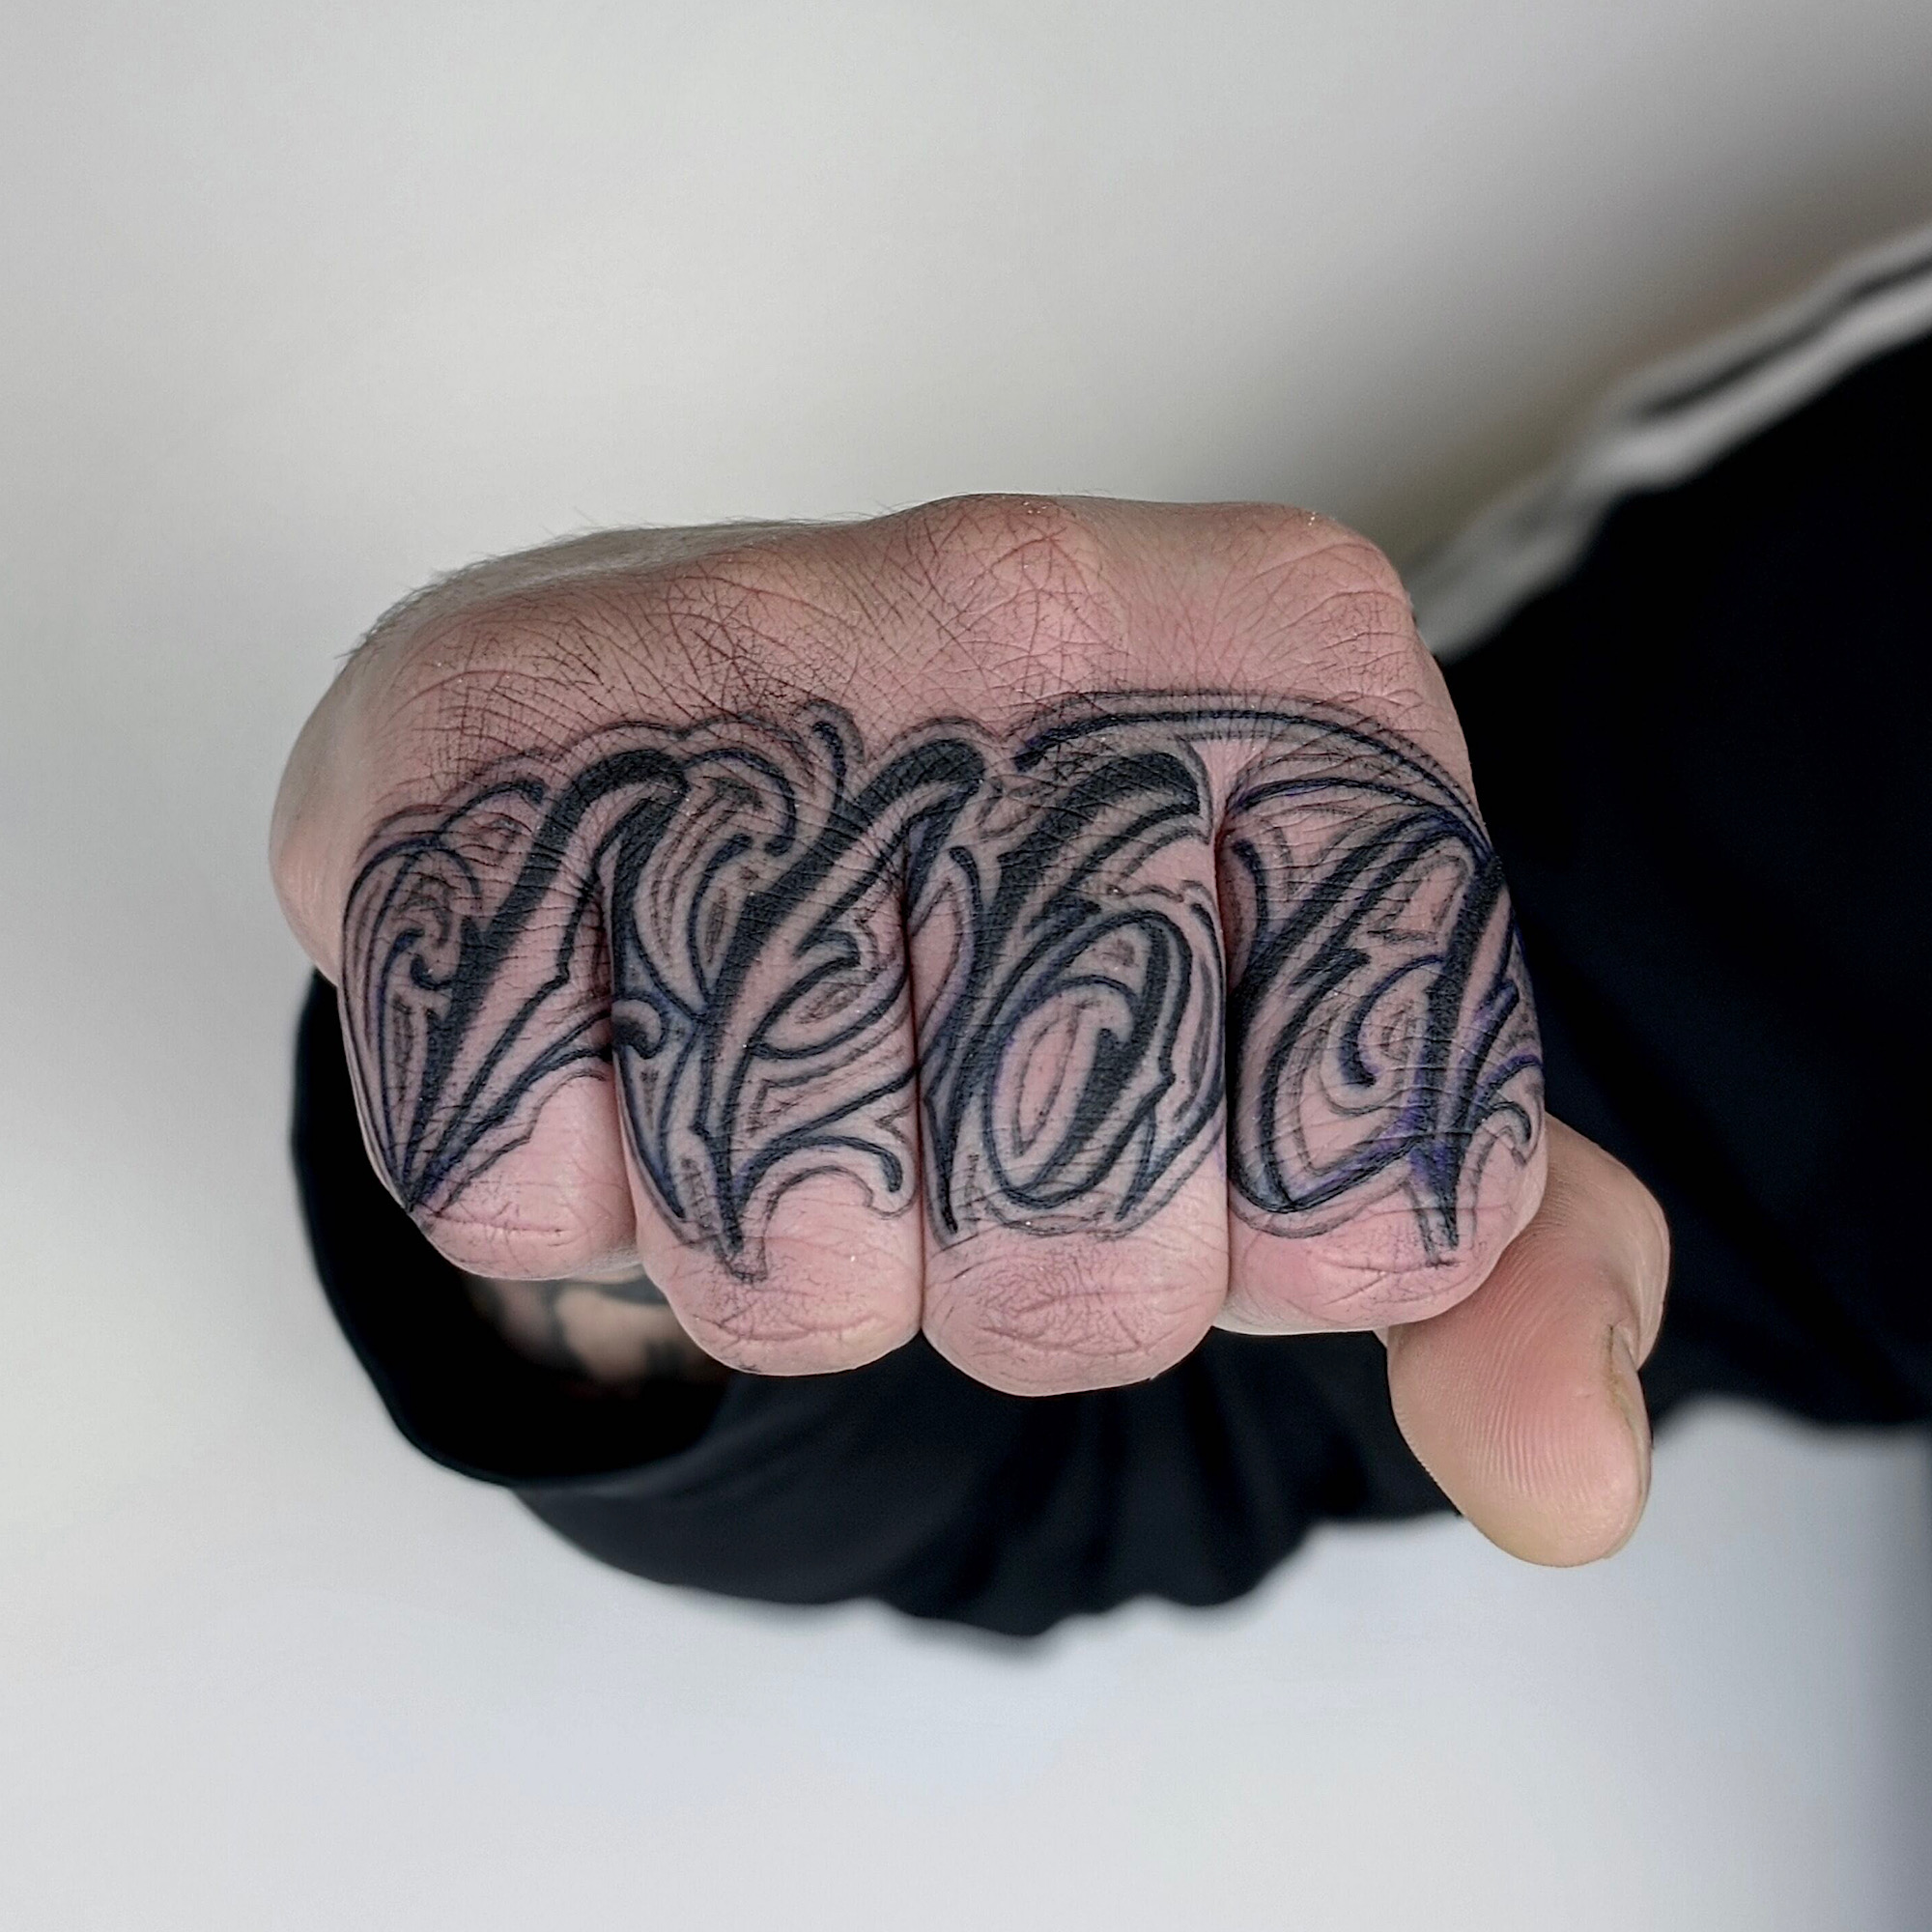 script tattoo across fingers love letters black and grey gray lettering hand tattoo by Rick Ricardo Pedro at Nexus Collective